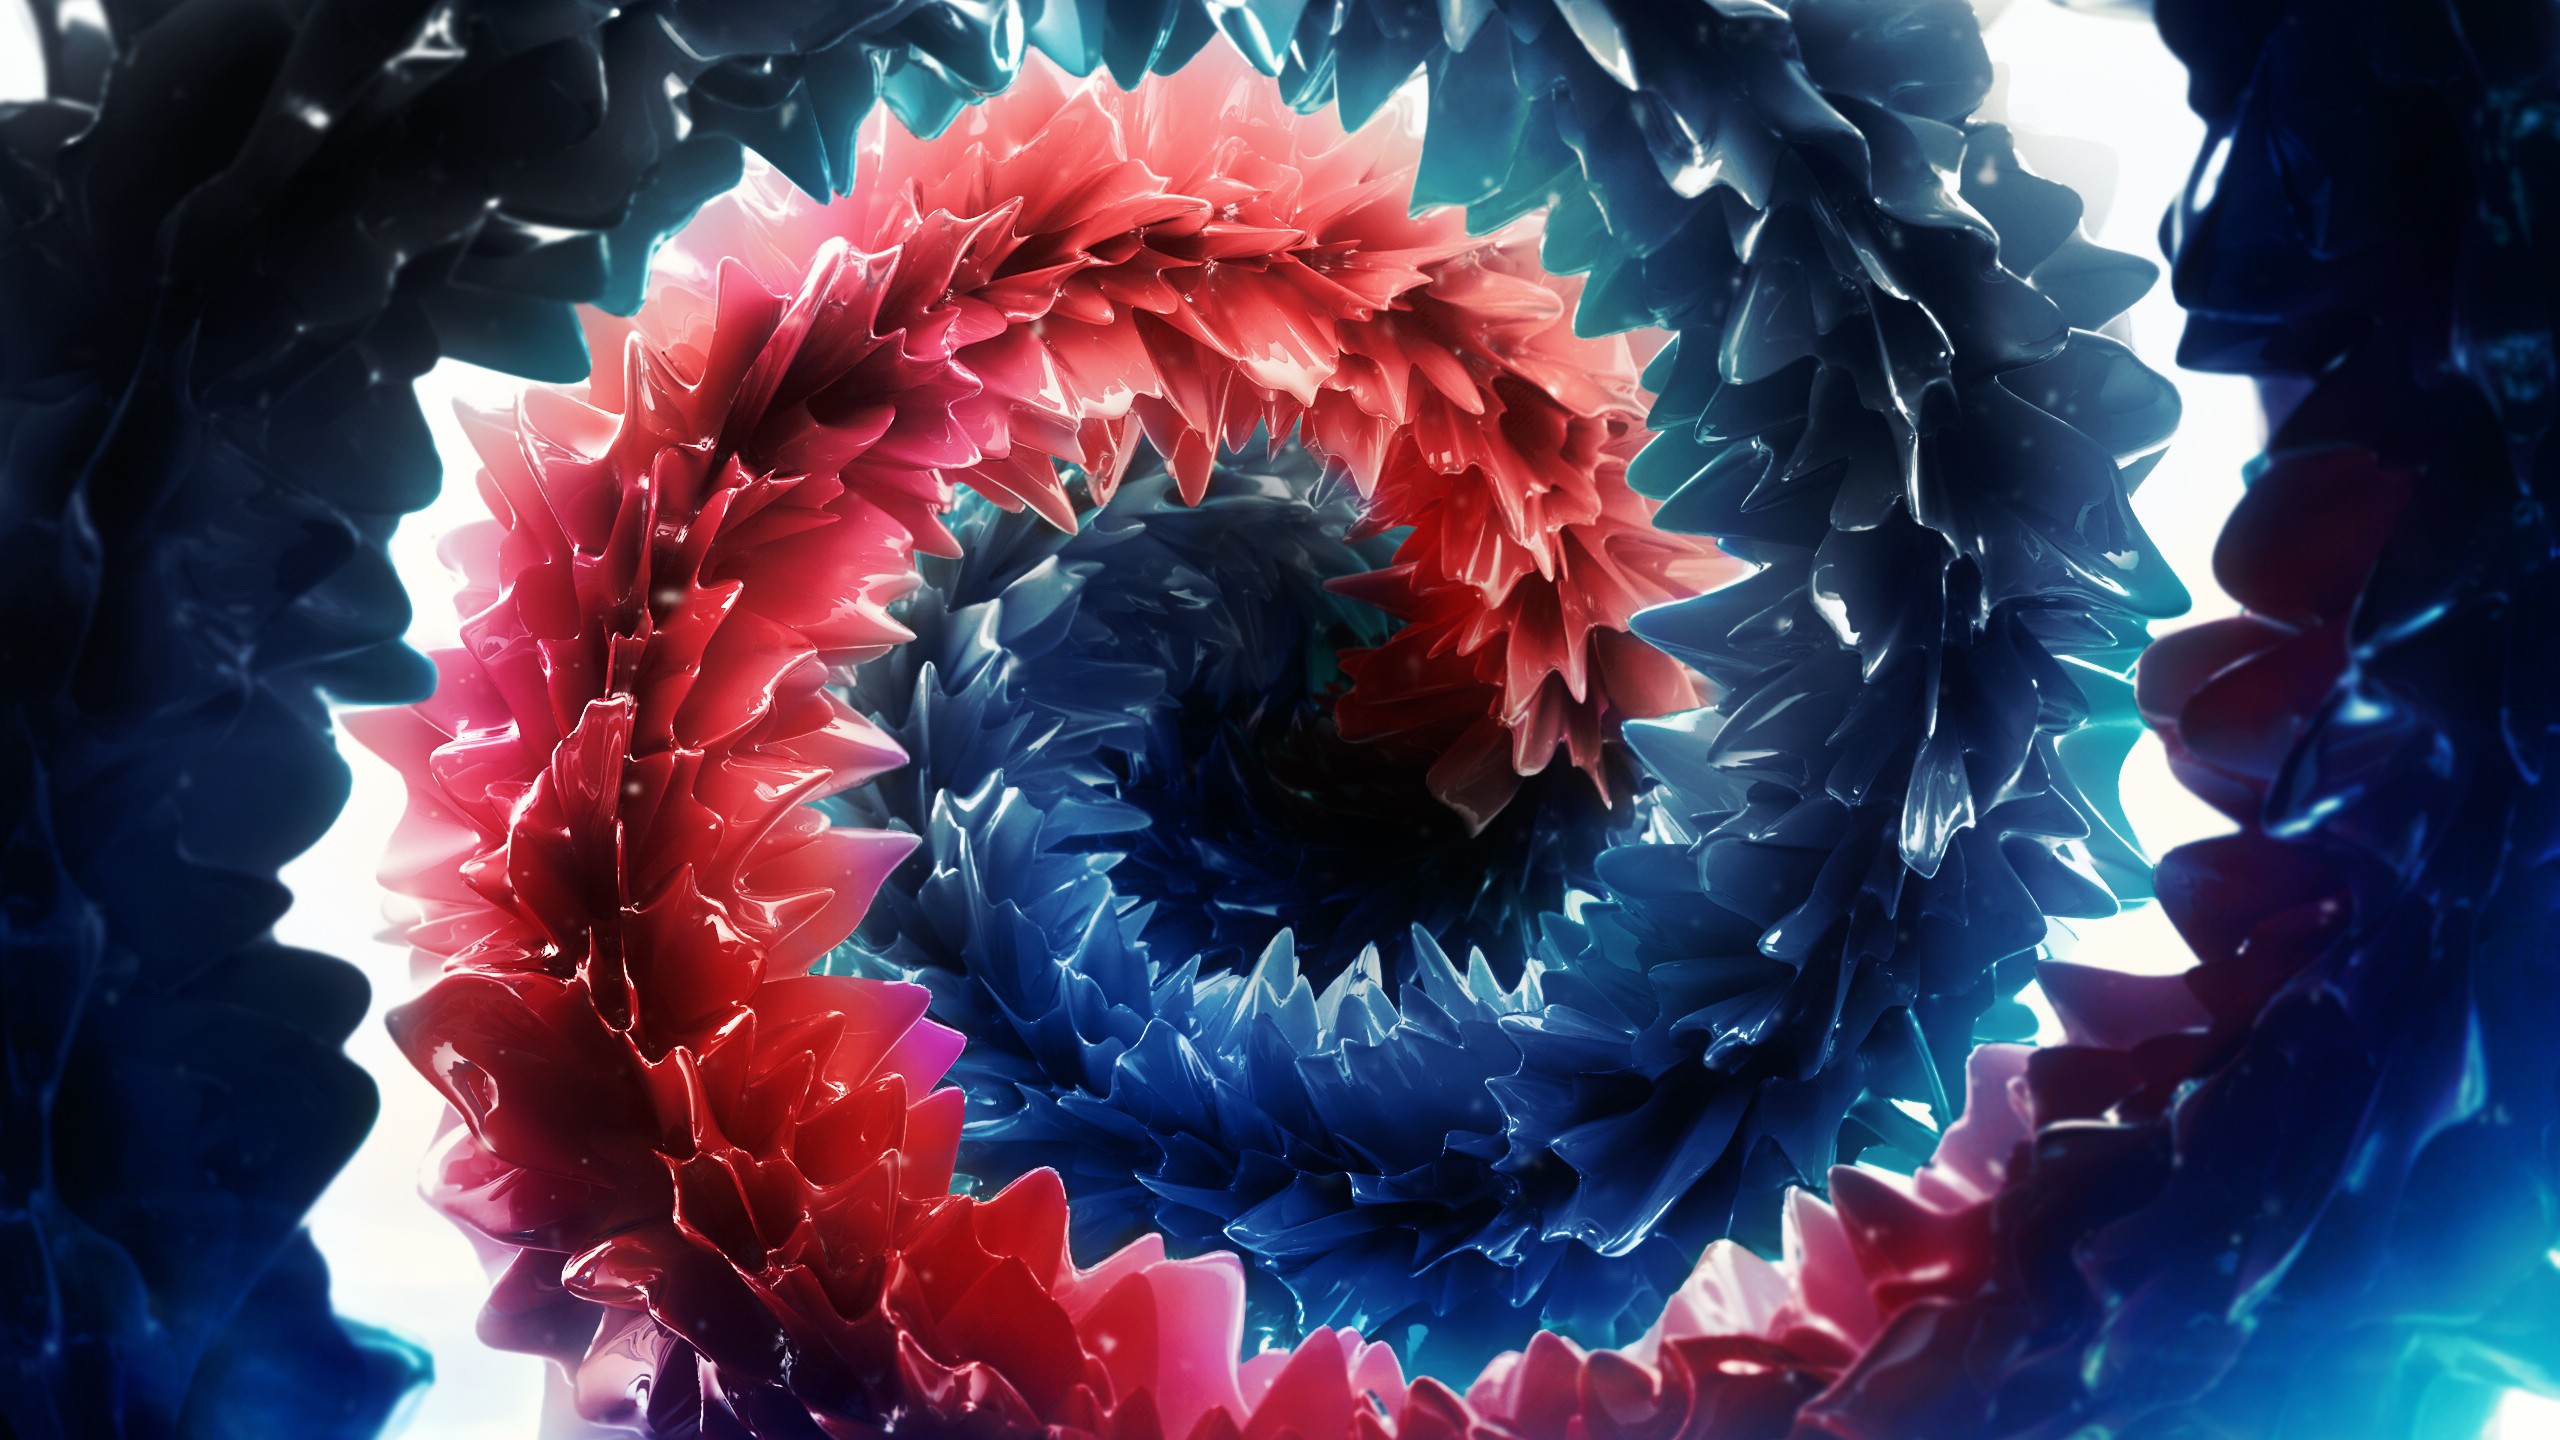 Abstract red and blue spiral d graphics desktop wallpapers x